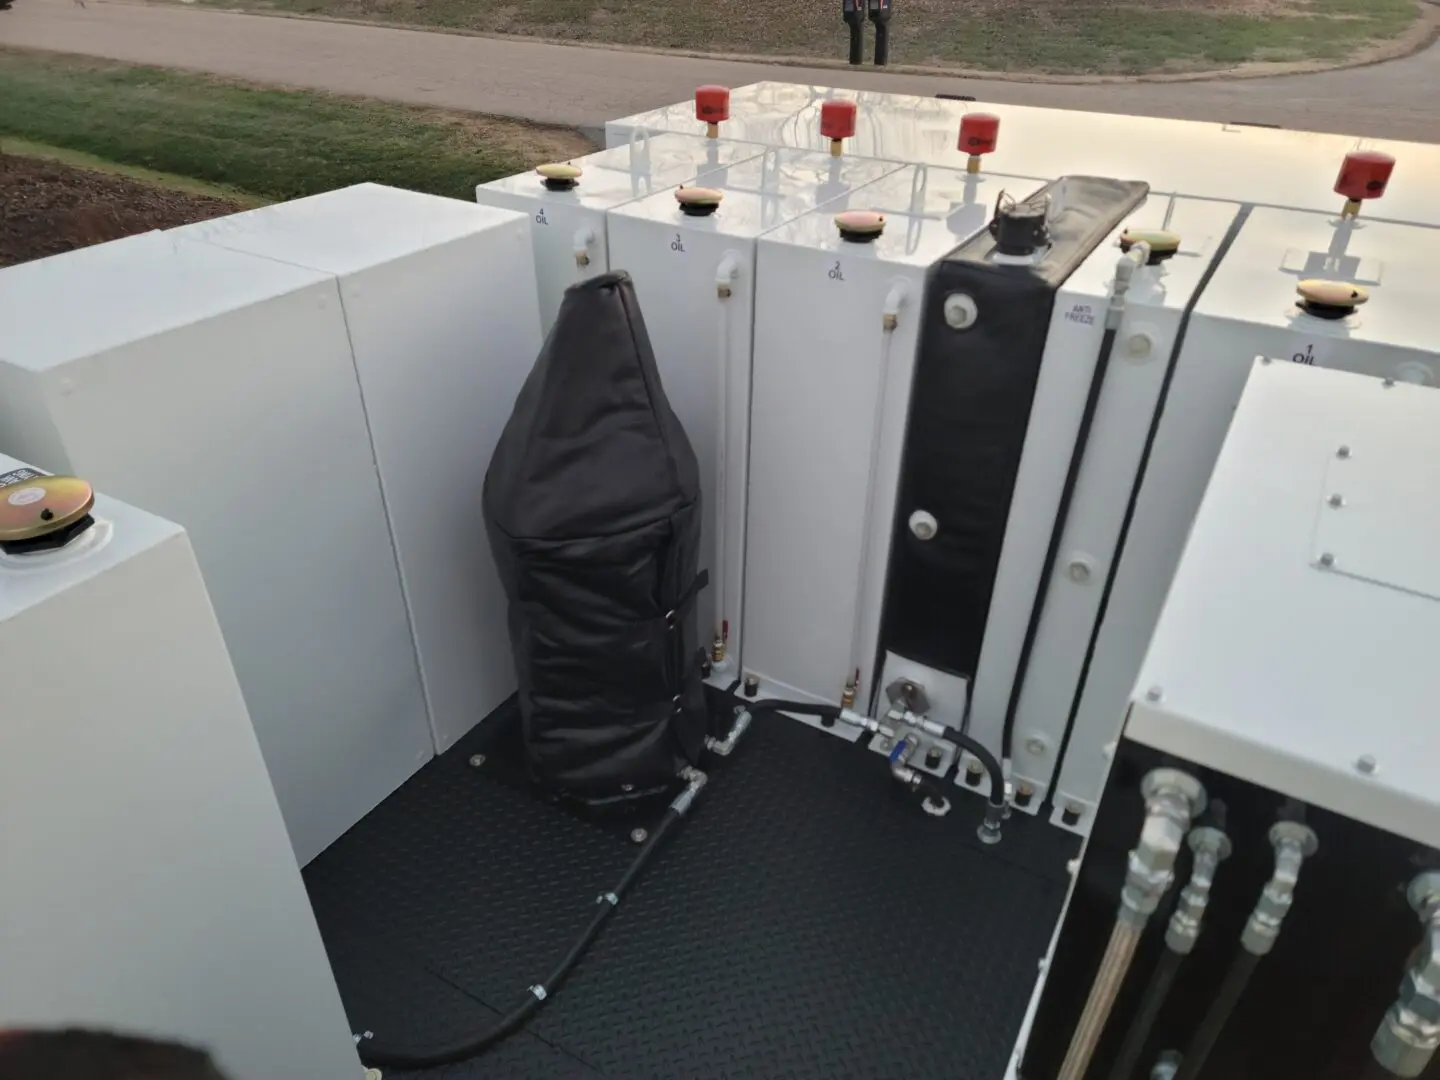 A view of the back of an enclosed trailer.